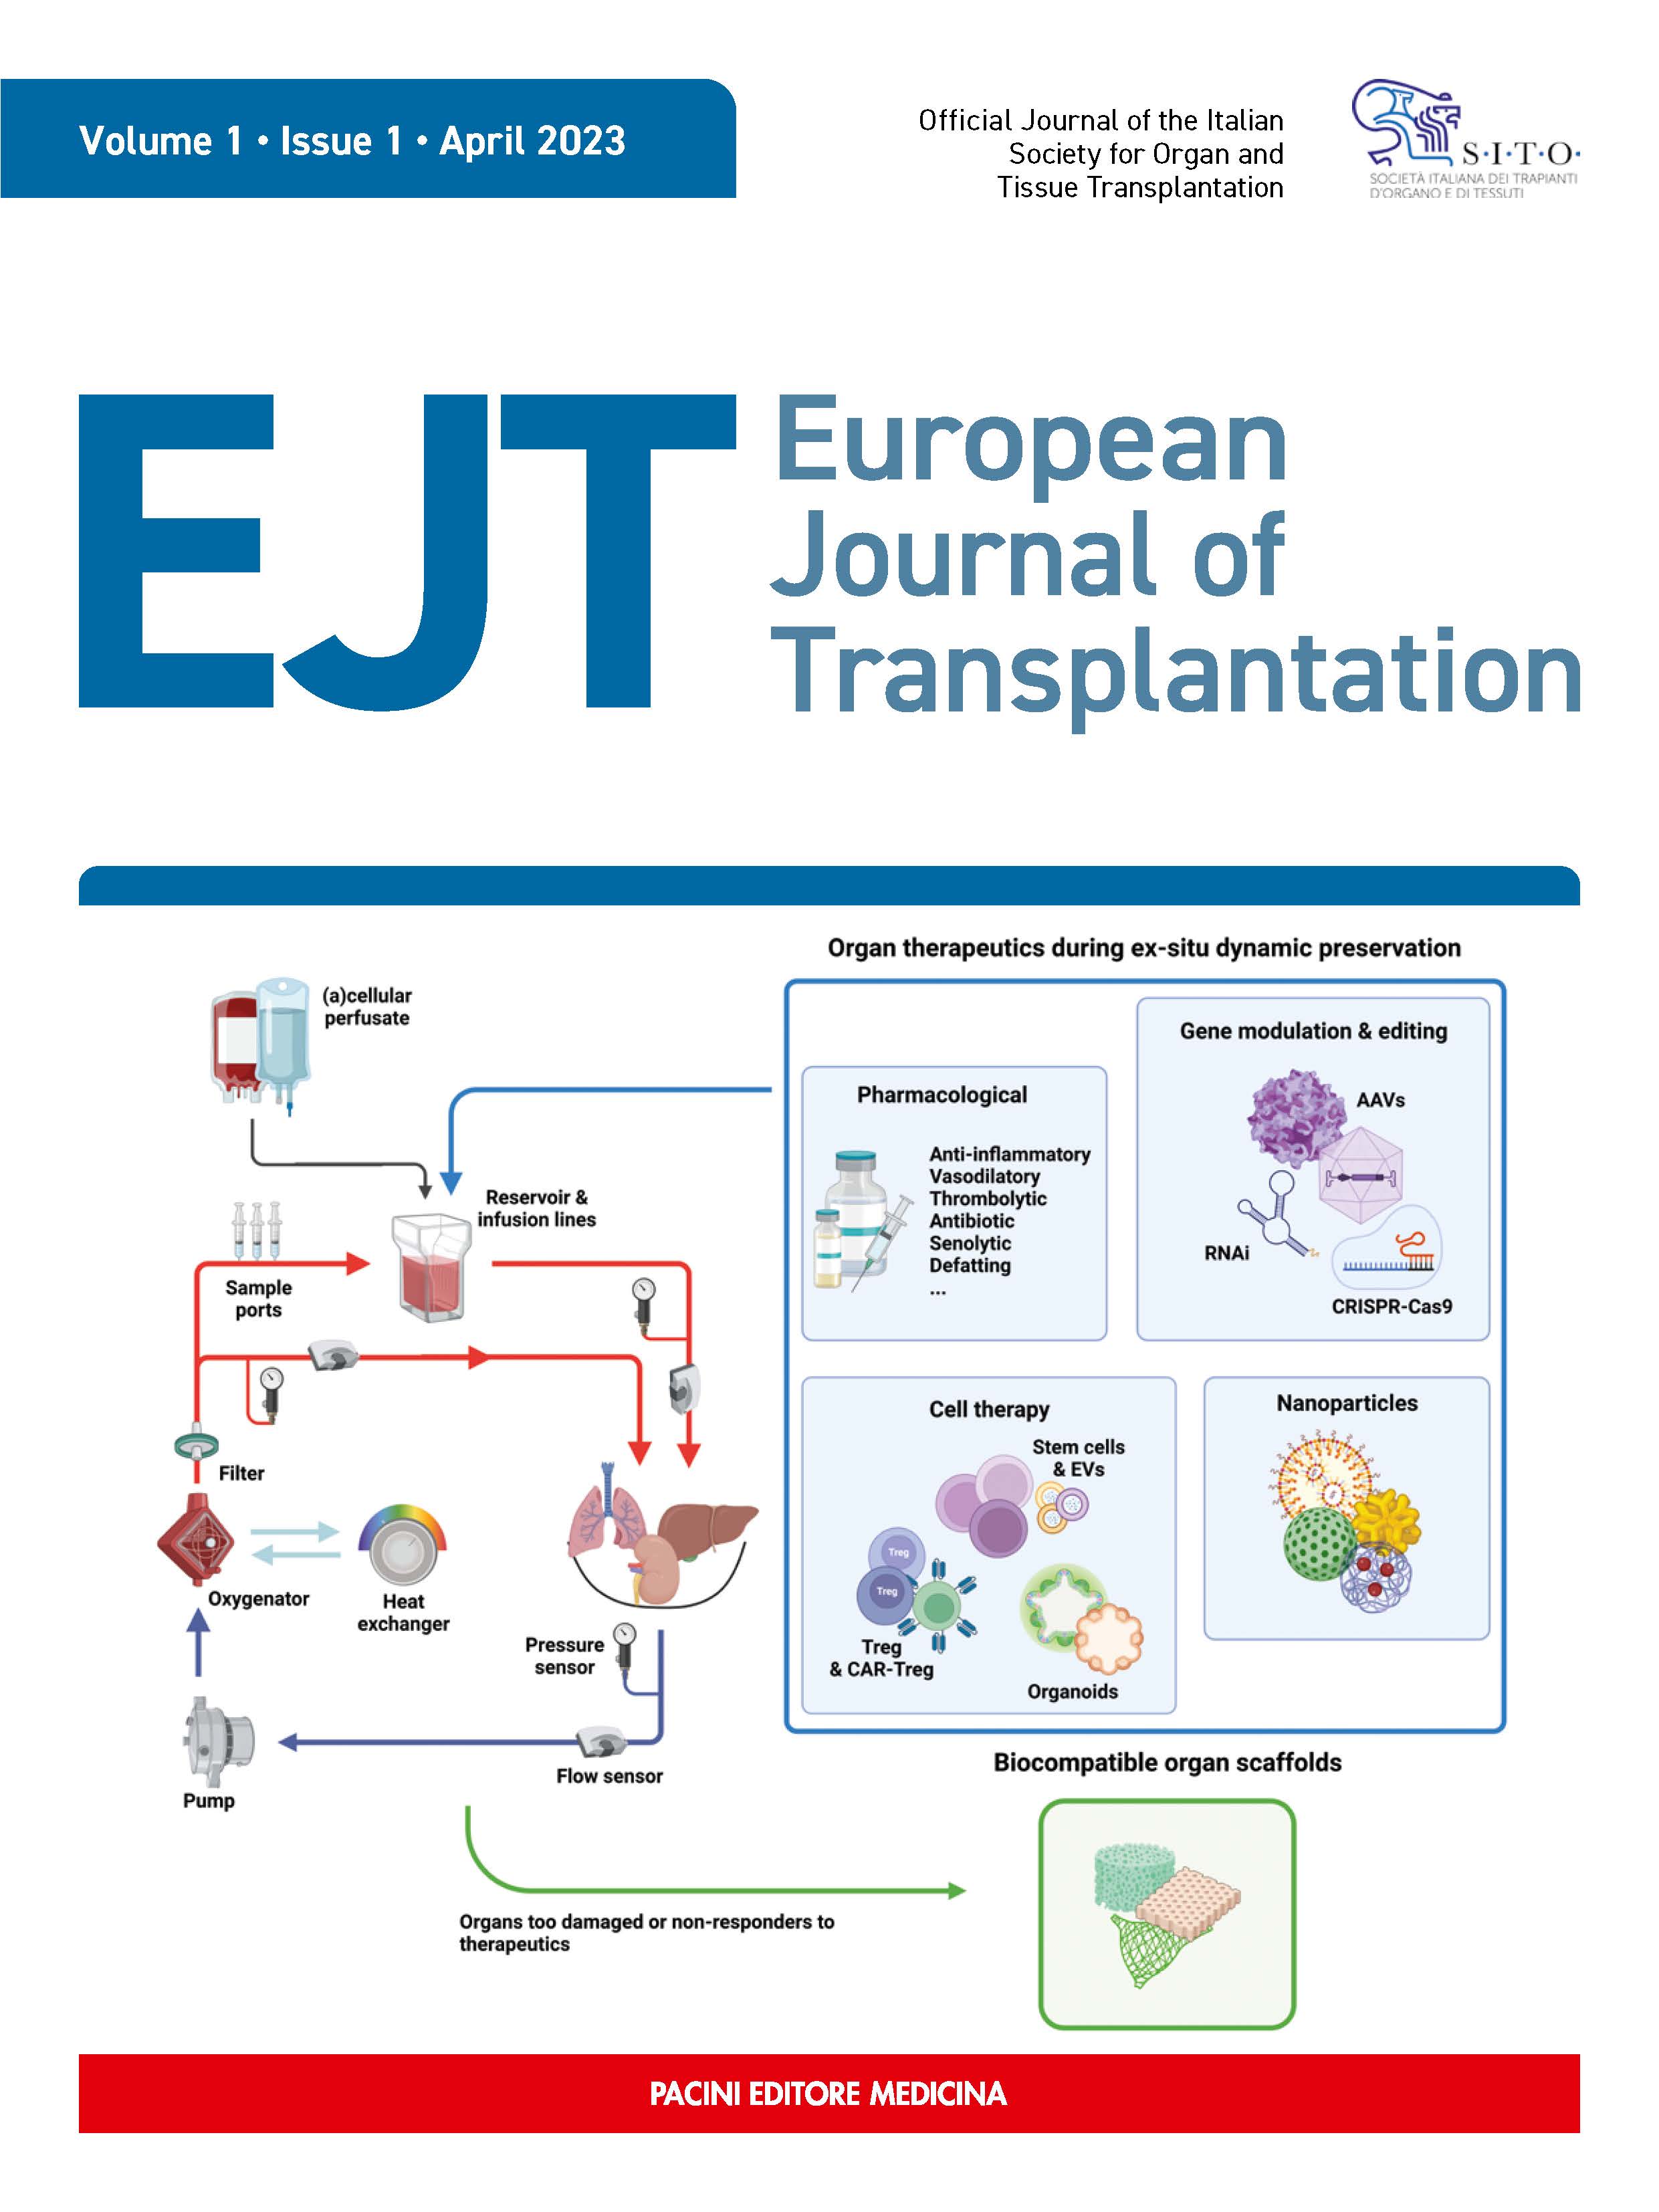 Special Issue 1 - April 2023 - Machine perfusion in organ transplantation